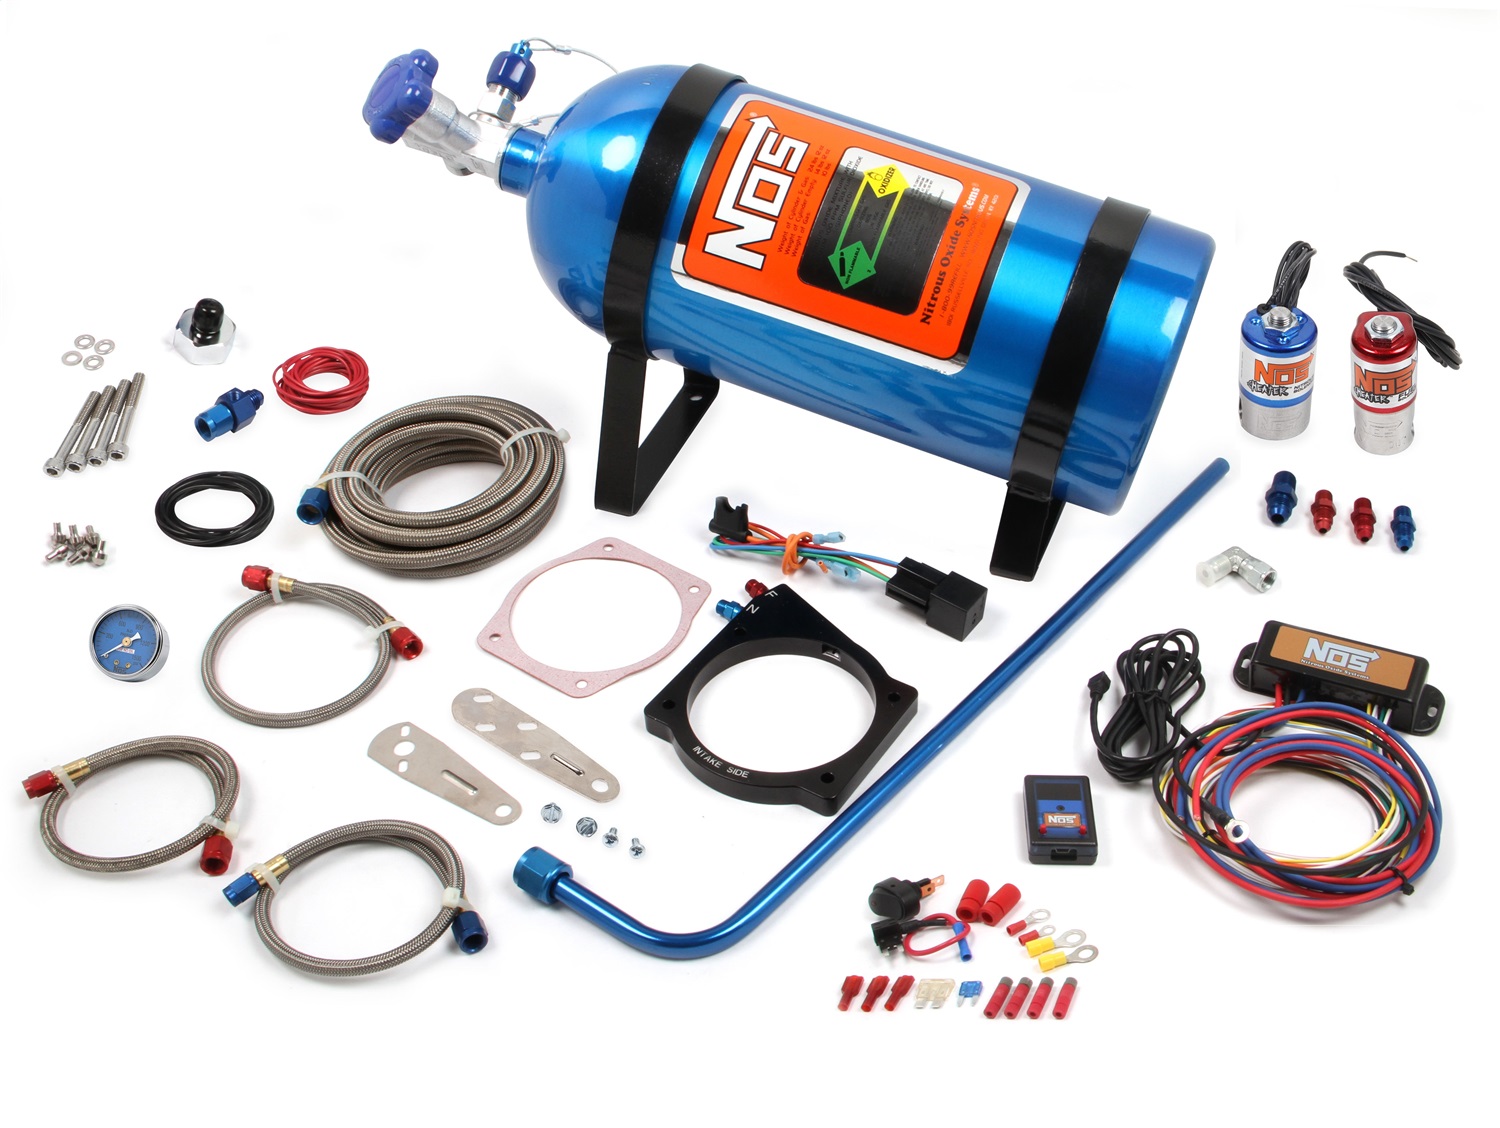 2010-2011 Chevrolet Camaro Nitrous Oxide Injection System Kit LS3 90MM NOS PLATE COMPLETE DBW KIT